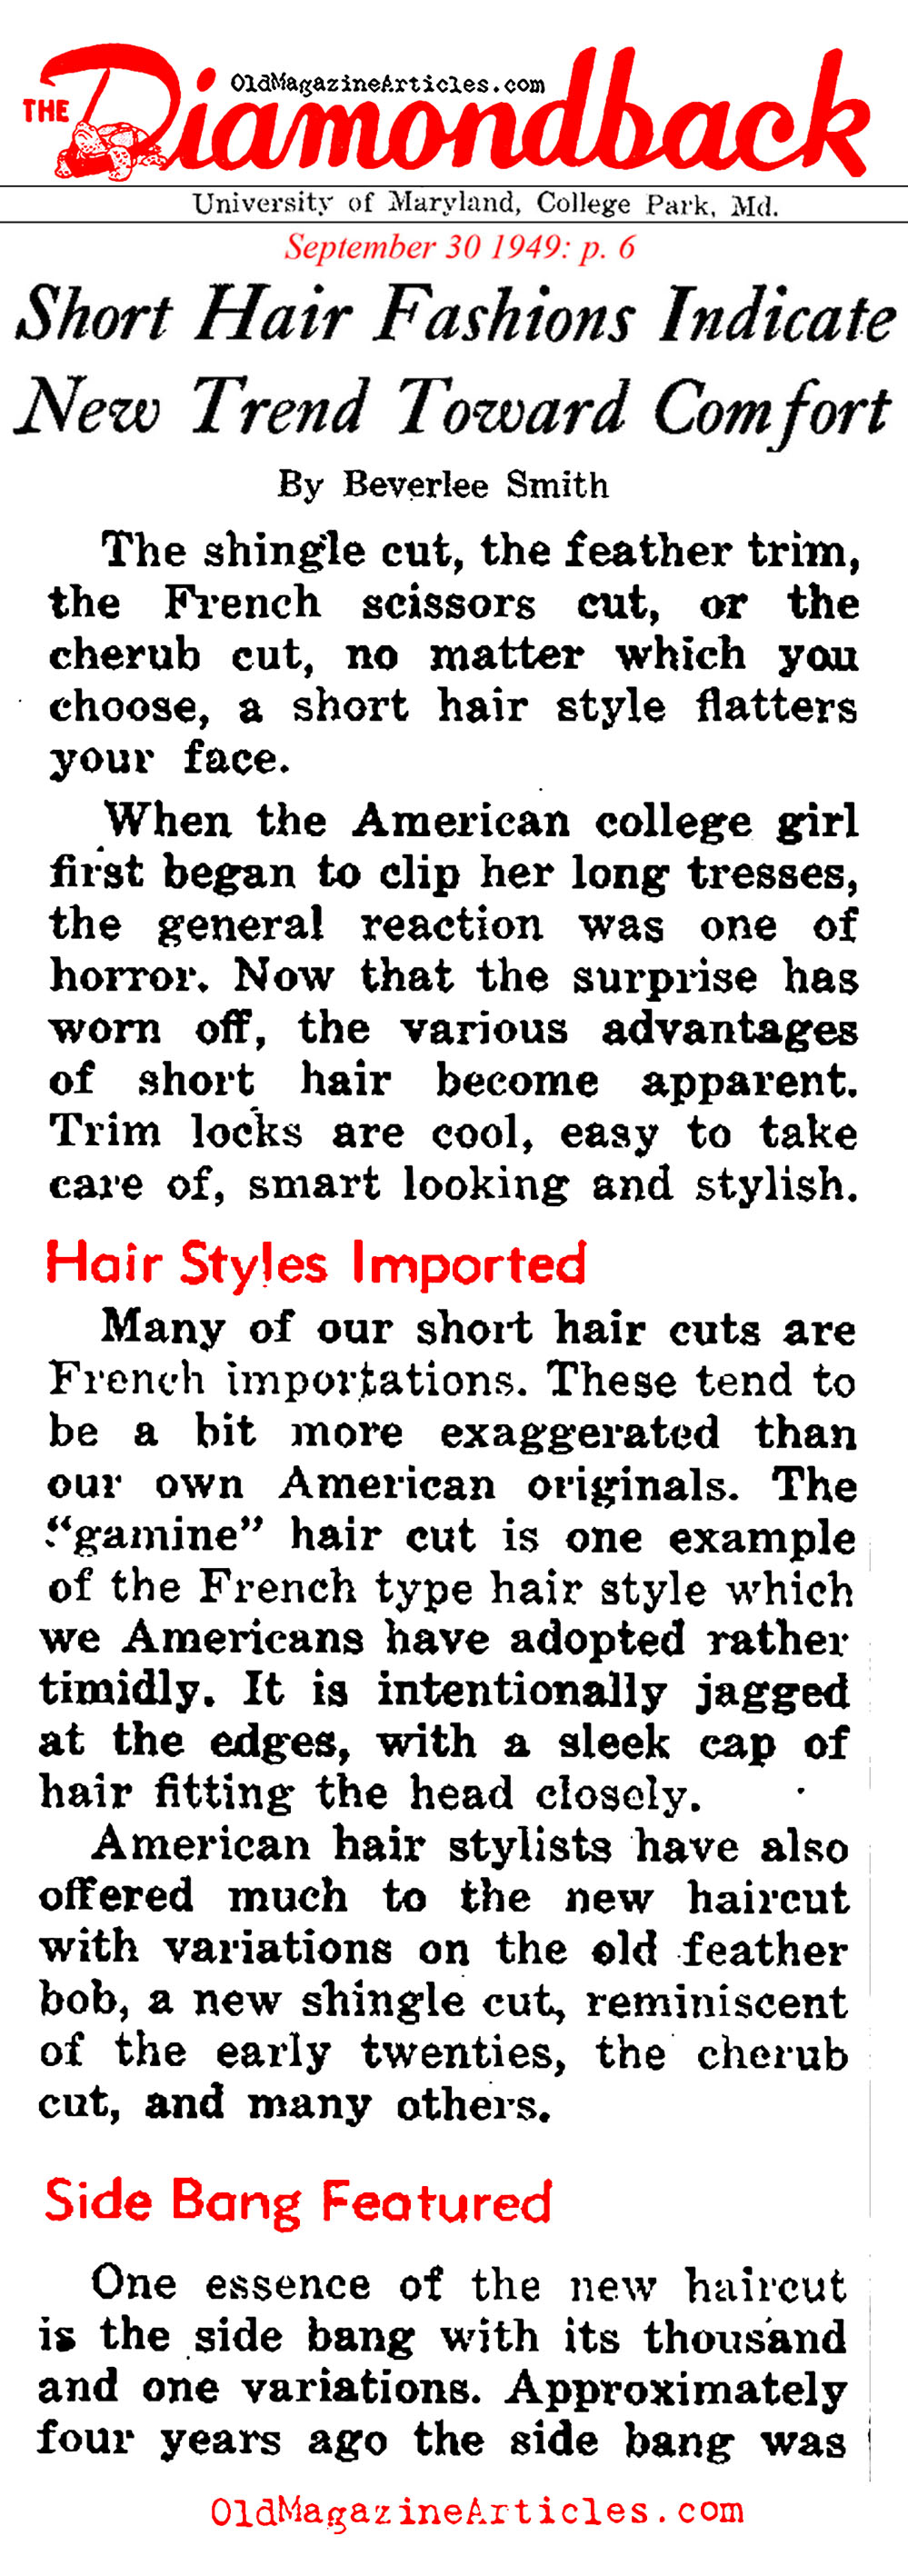 1940s Hairstyles 1950s Short Hairstyles College Hair Fashions